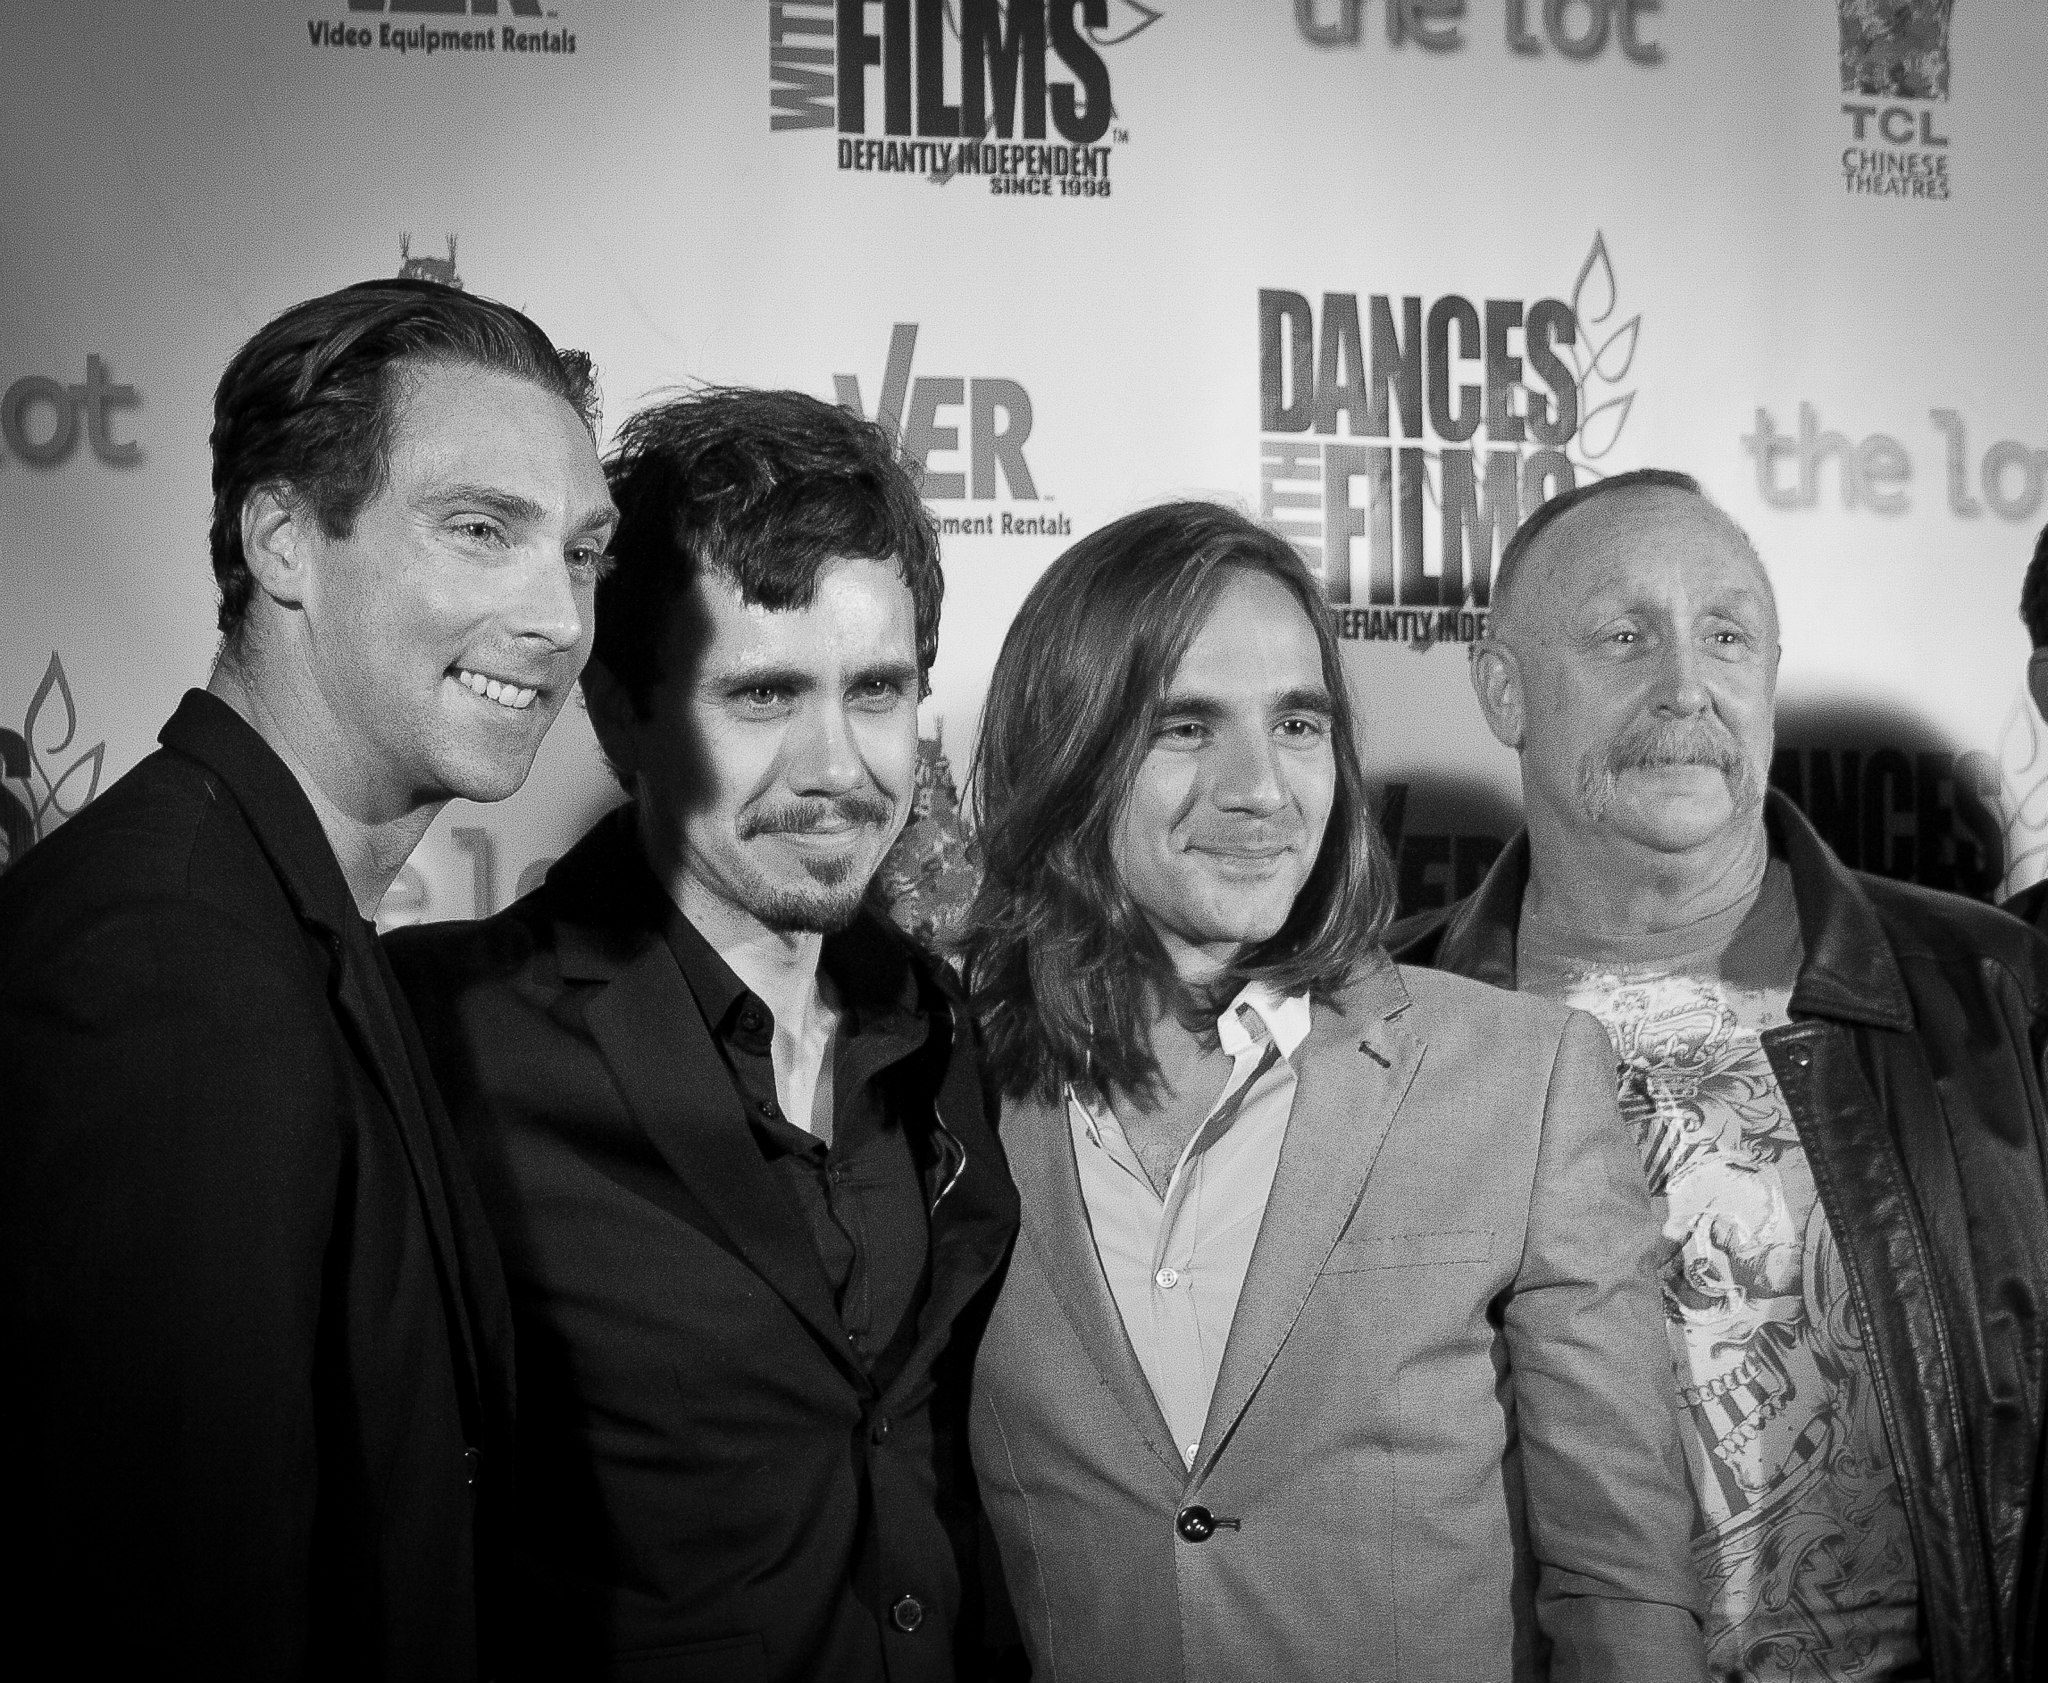 'The Toy Soldiers' World Premiere at Dances With Films - Hollywood's Chinese Theatres - June 2014. With Nick Frangione, Al Burke and Craig Bruss.